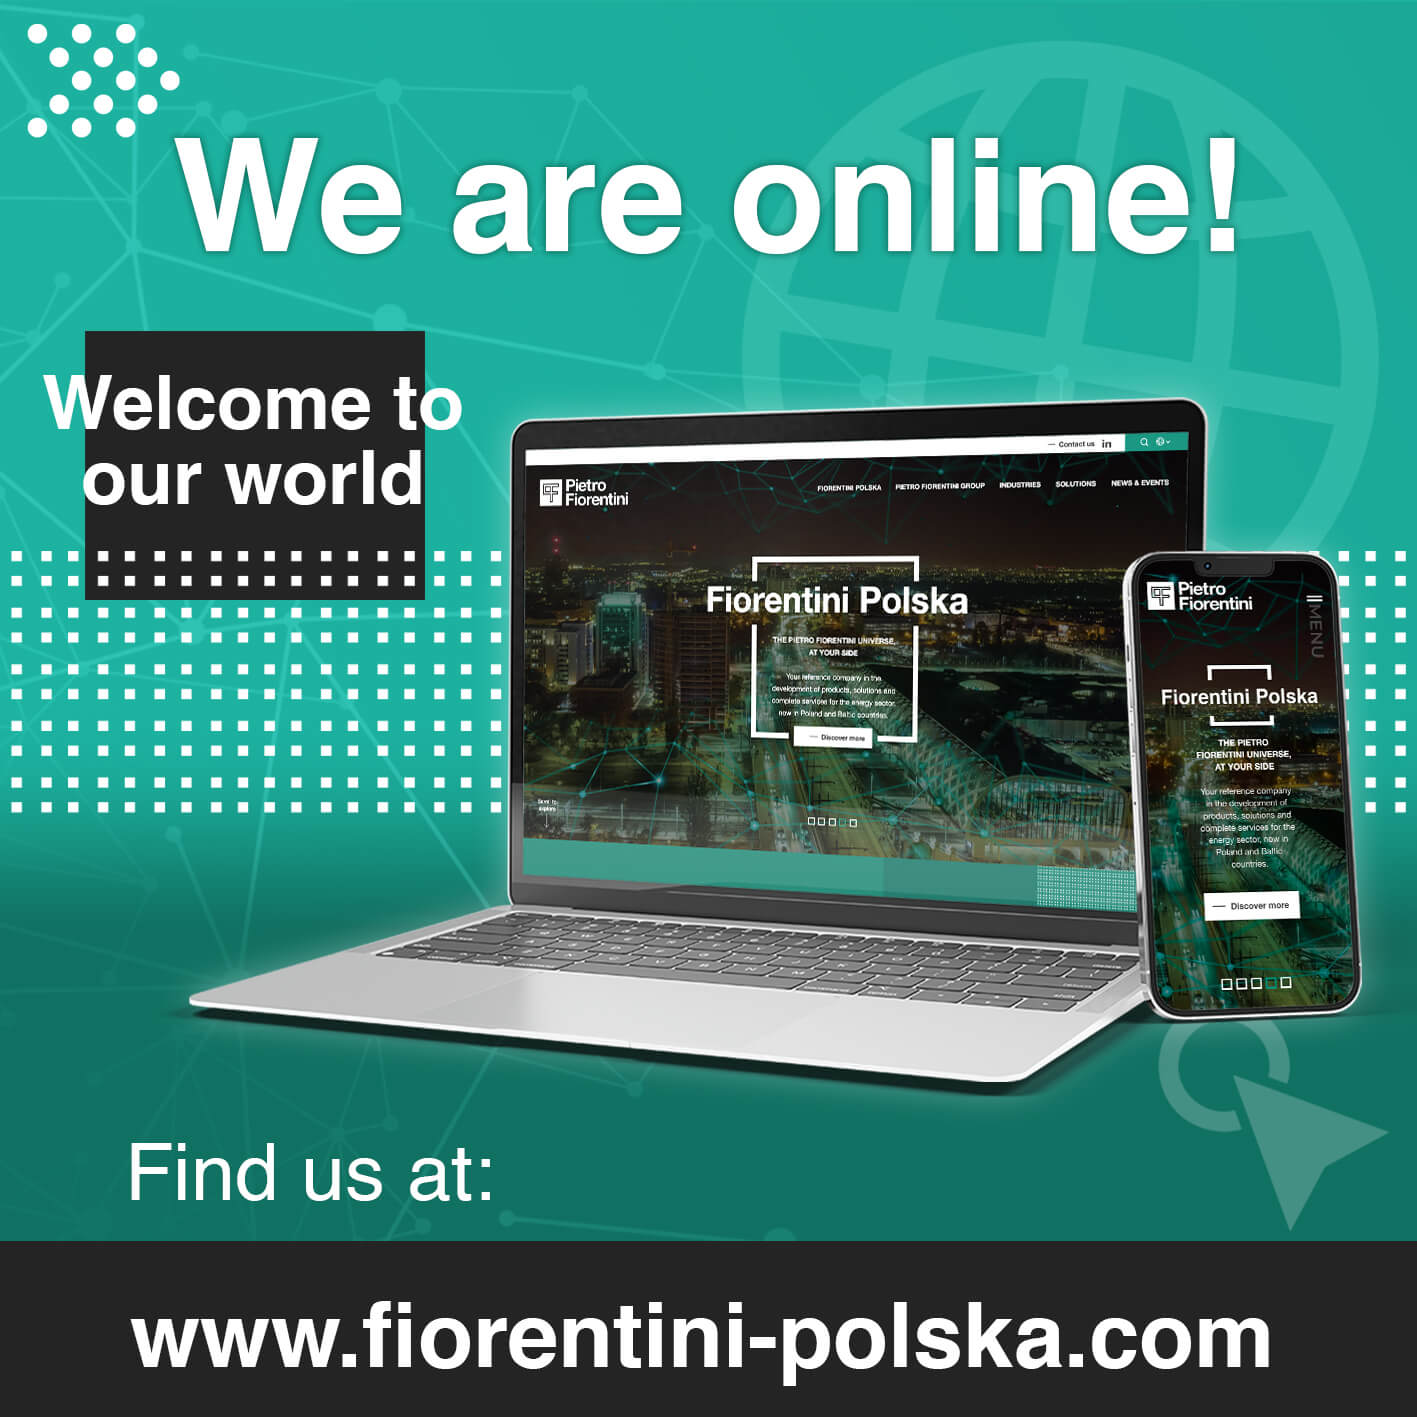 We are pleased to announce the launch of our new website